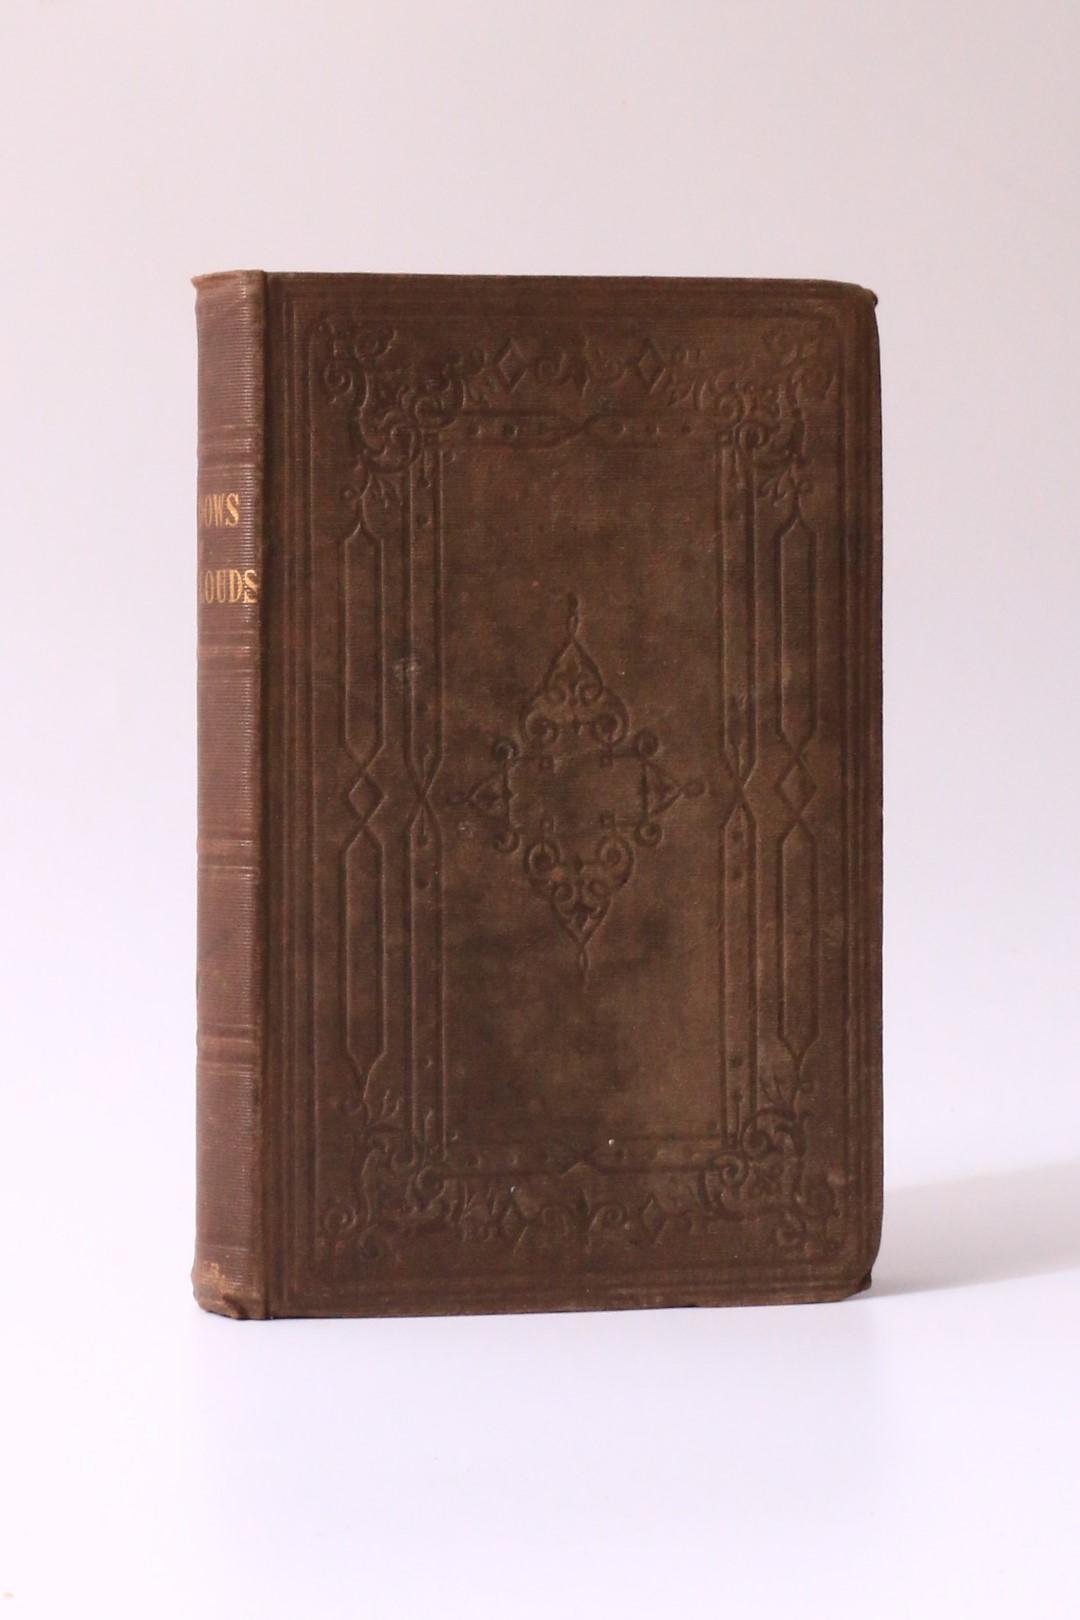 Zeta [J.A. Froude] - Shadows of the Clouds - John Ollivier, 1847, First Edition.